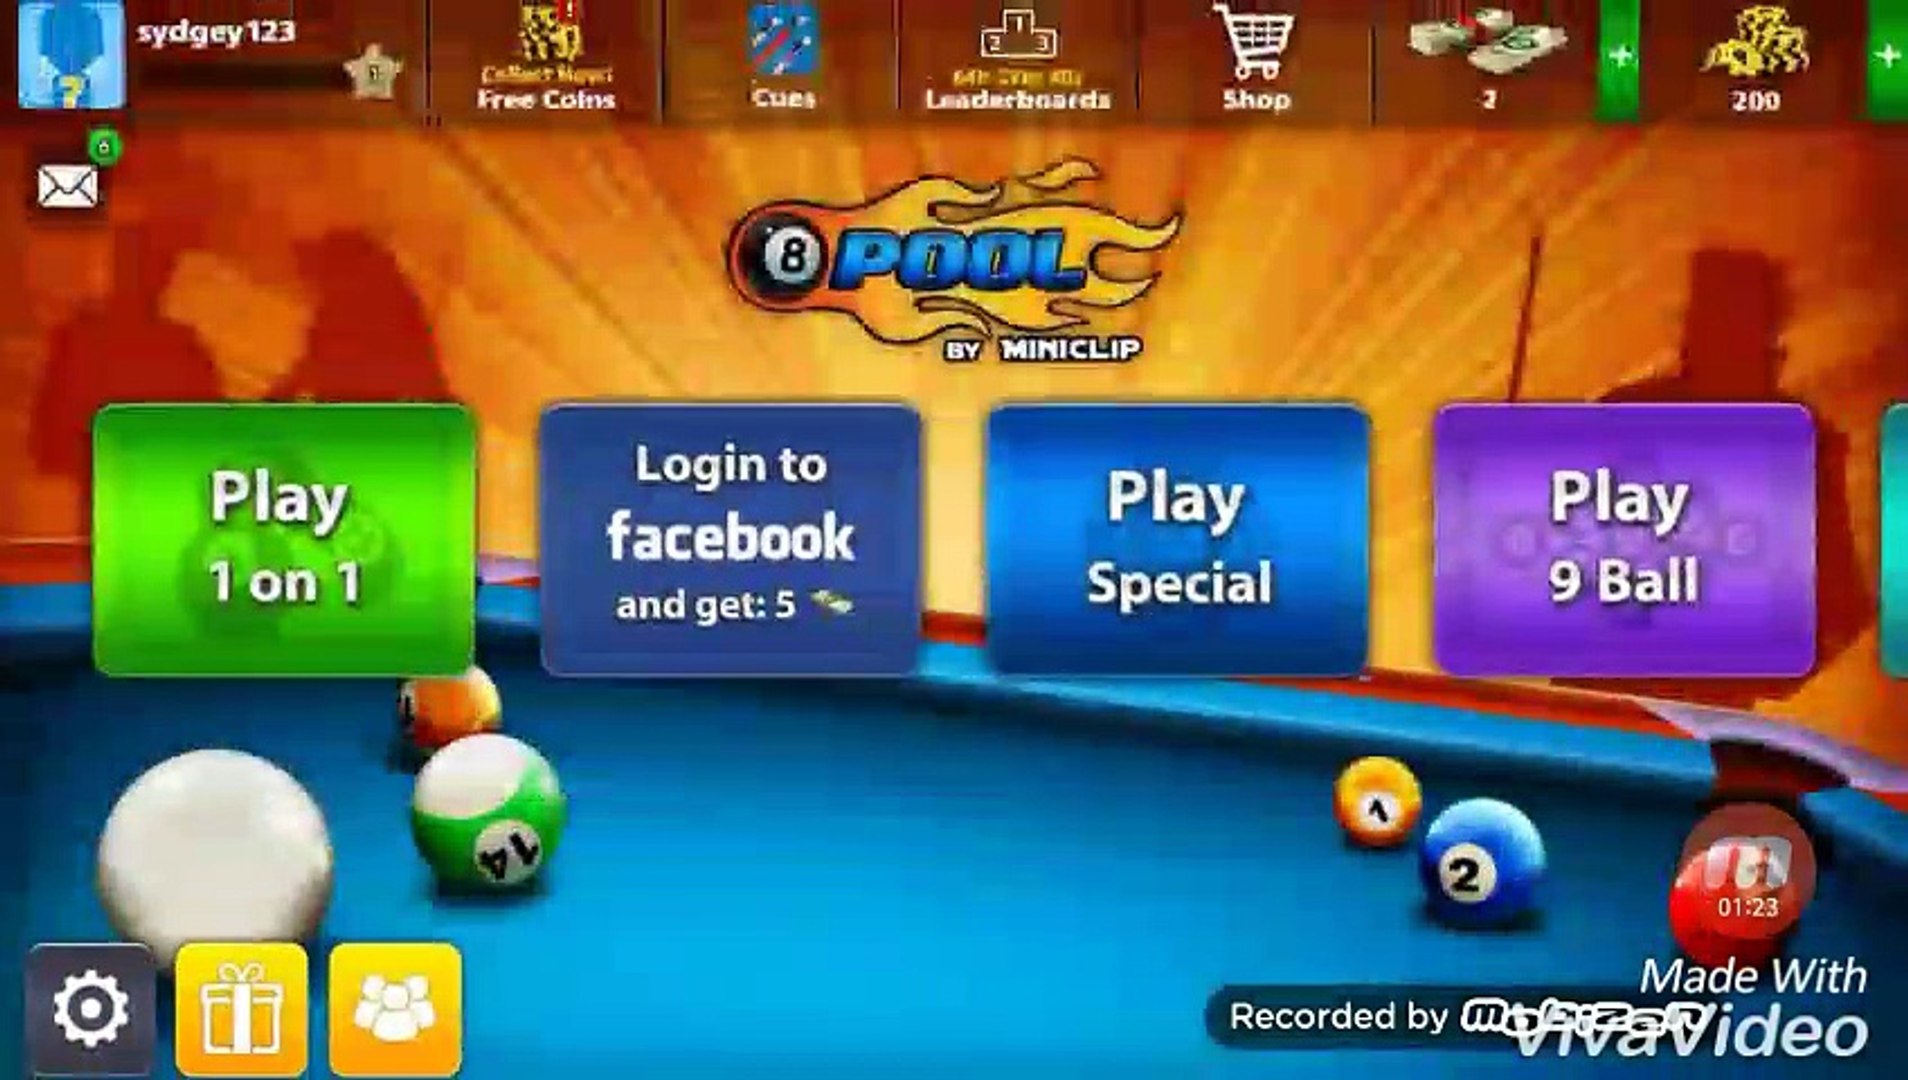 Get Free Coins 8 Pool Free Coins For 8 Ball Pool Miniclip Takni Kal Video Dailymotion